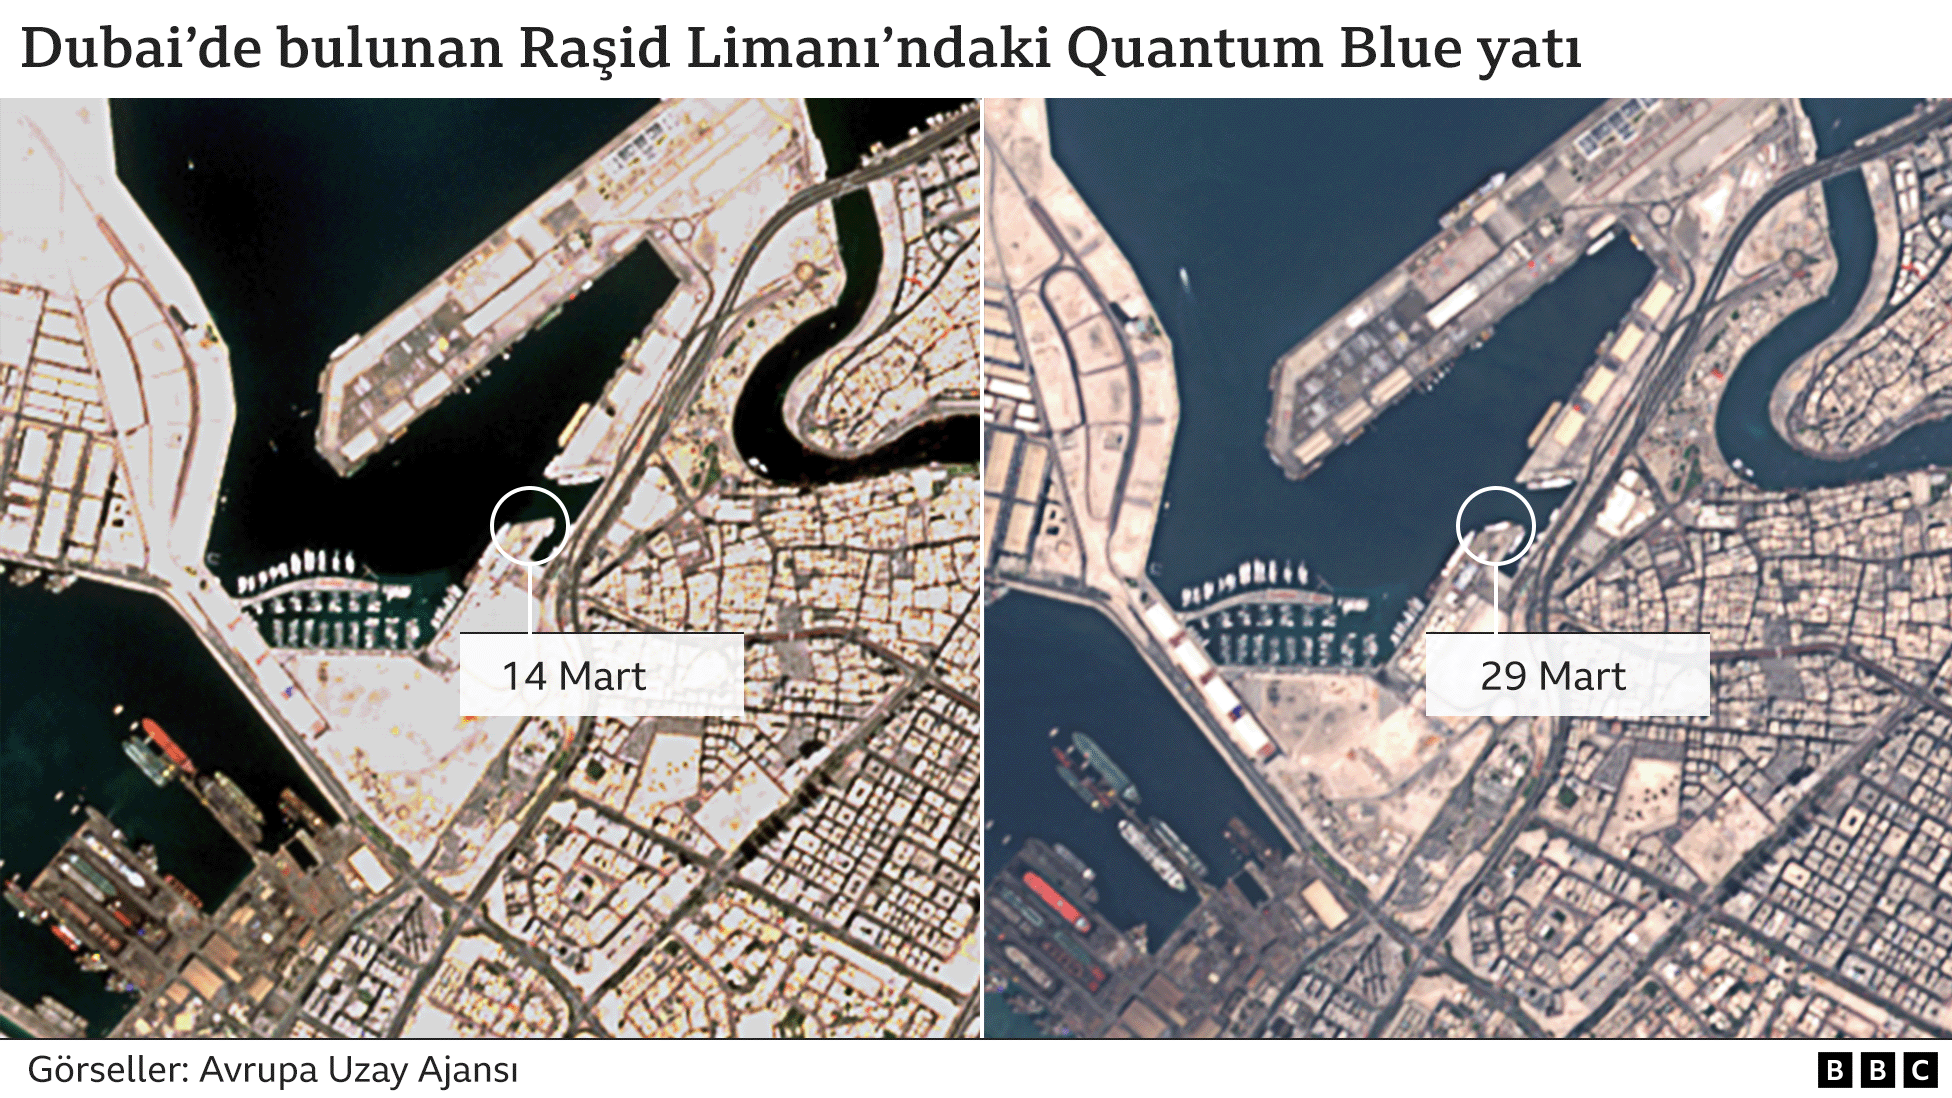 quantum_blue_before_and_after_2x640-nc.png